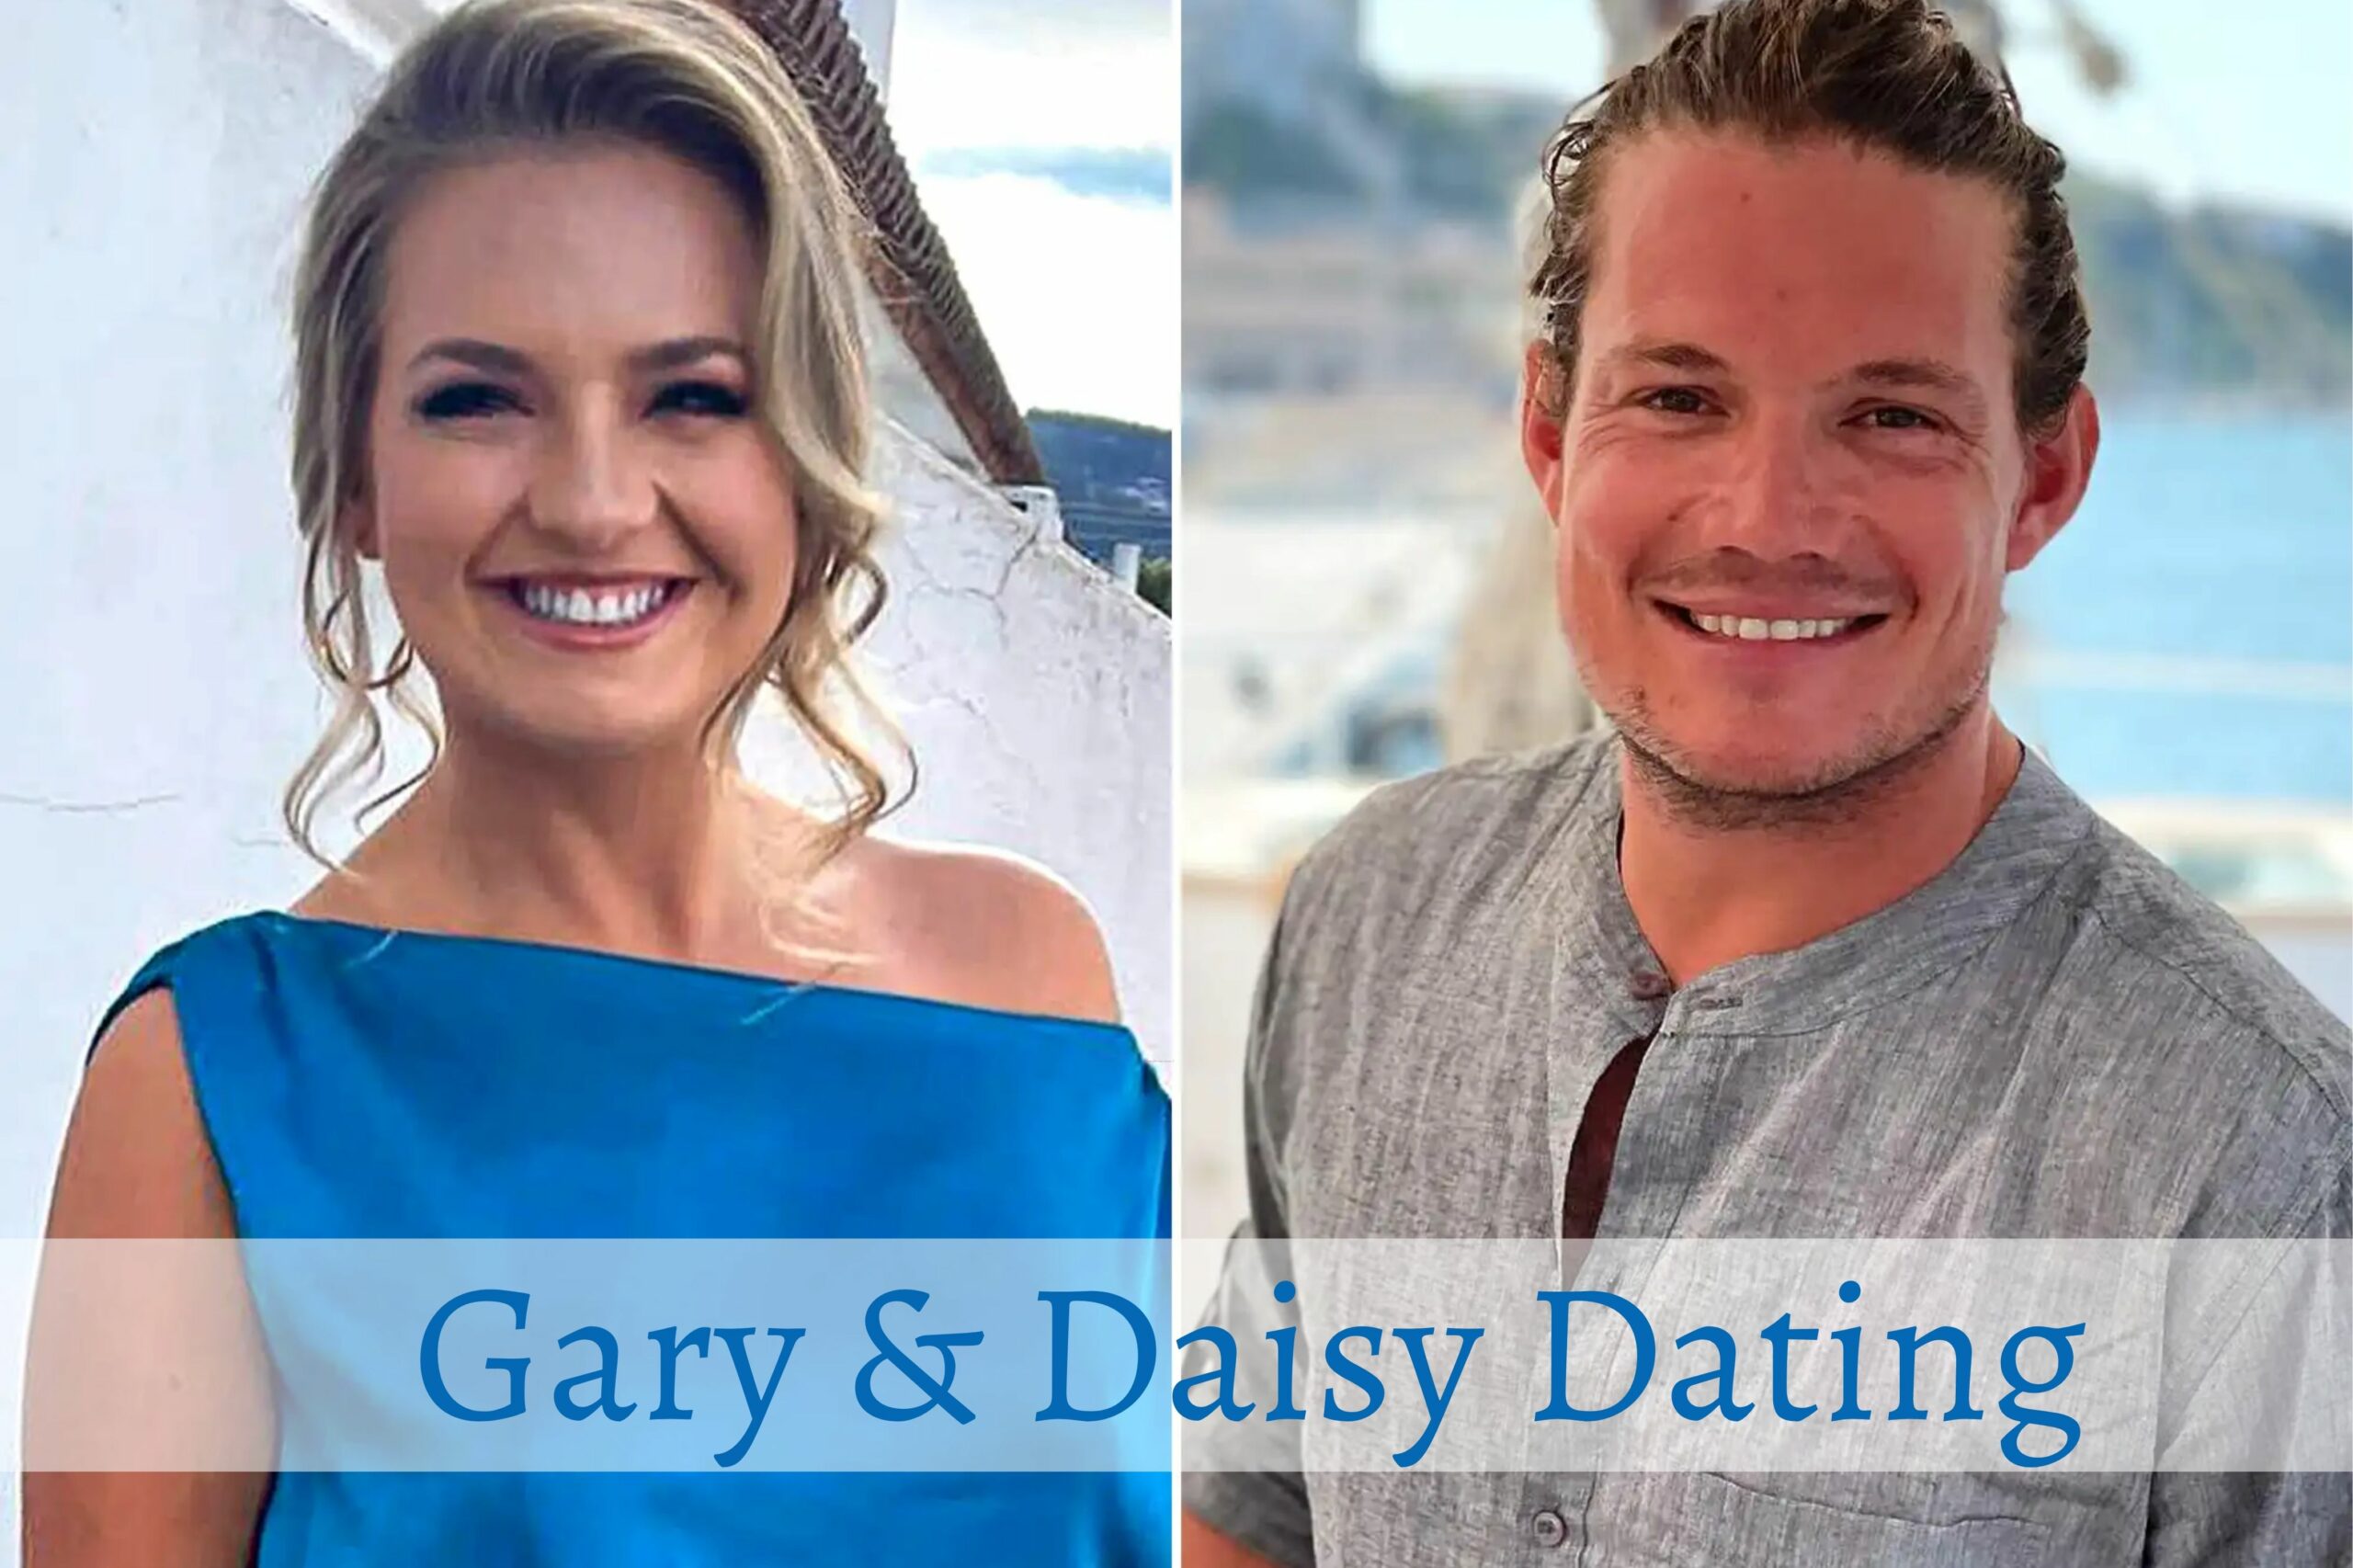 Are Gary And Daisy In A Relationship? Gary And Daisy Below Deck Relationship Speculations Have Increased